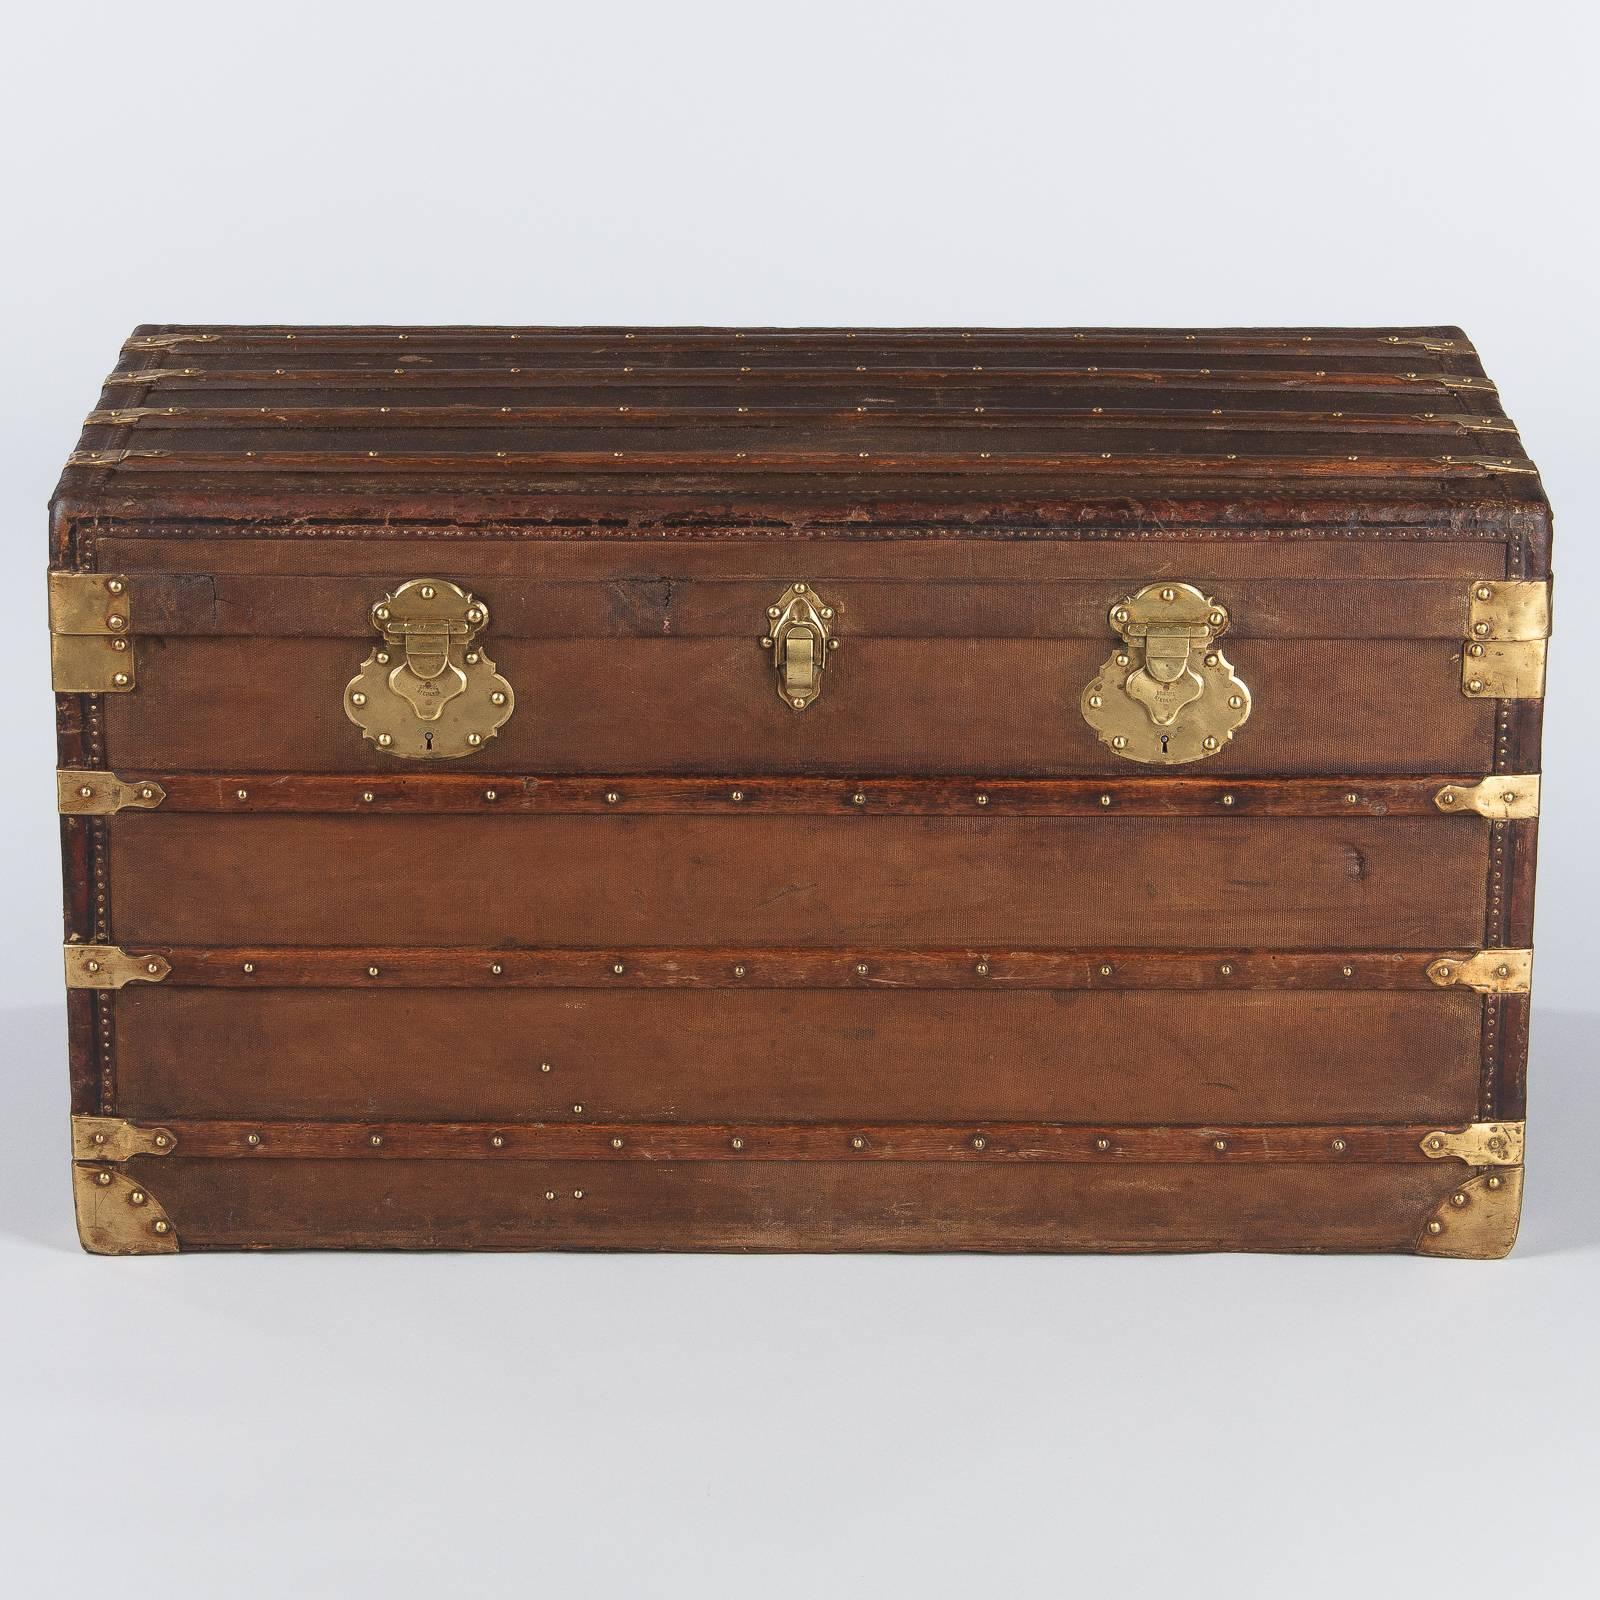 Oiled French Traveling Trunk, Early 1900s